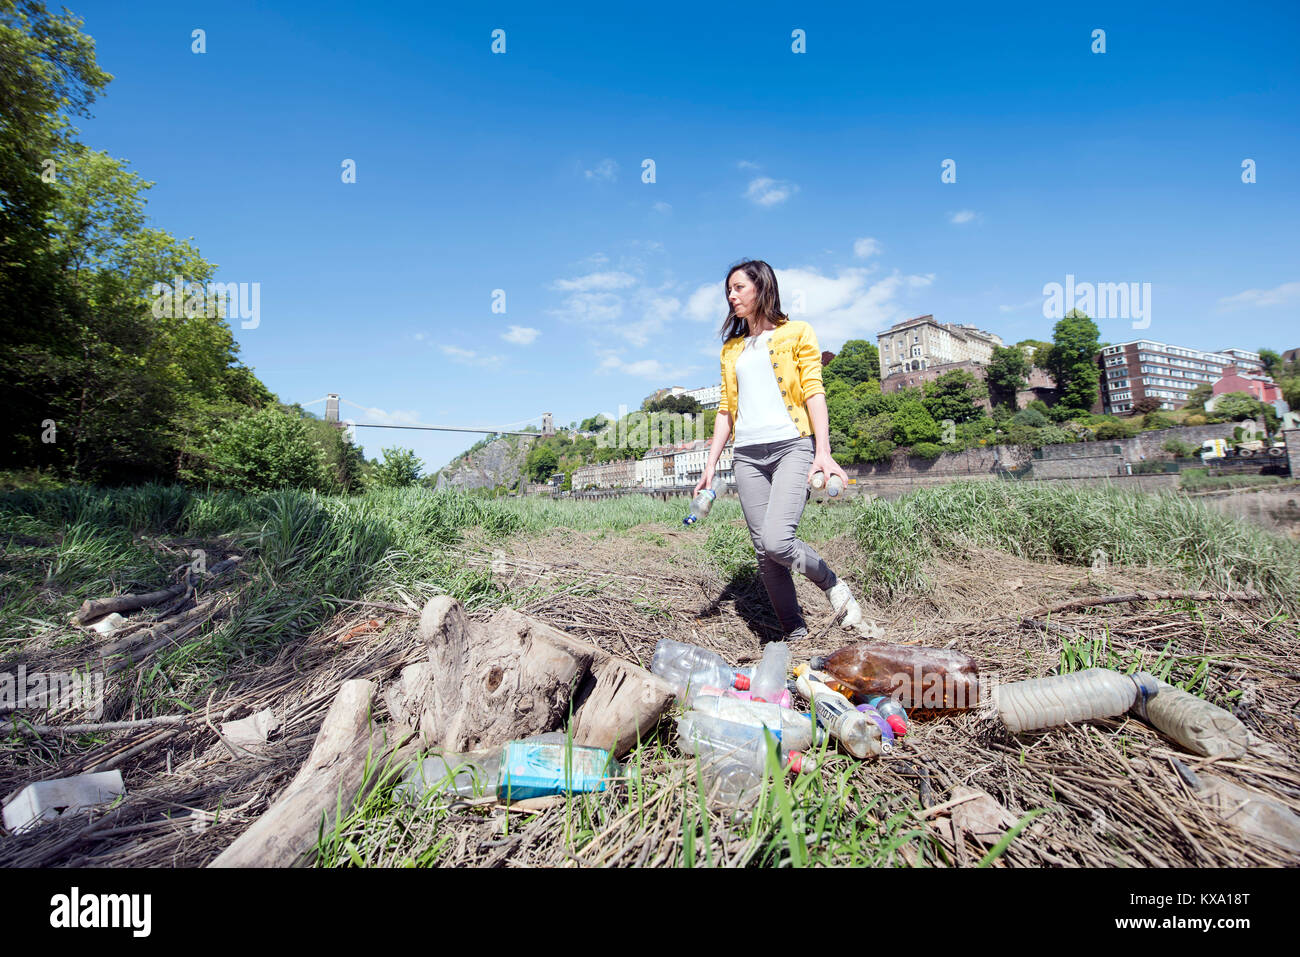 A member of ‘City To Sea’, a campaign to rid Bristol of plastic bottle waste collecting waste bottles on the banks of the Avon, UK Stock Photo